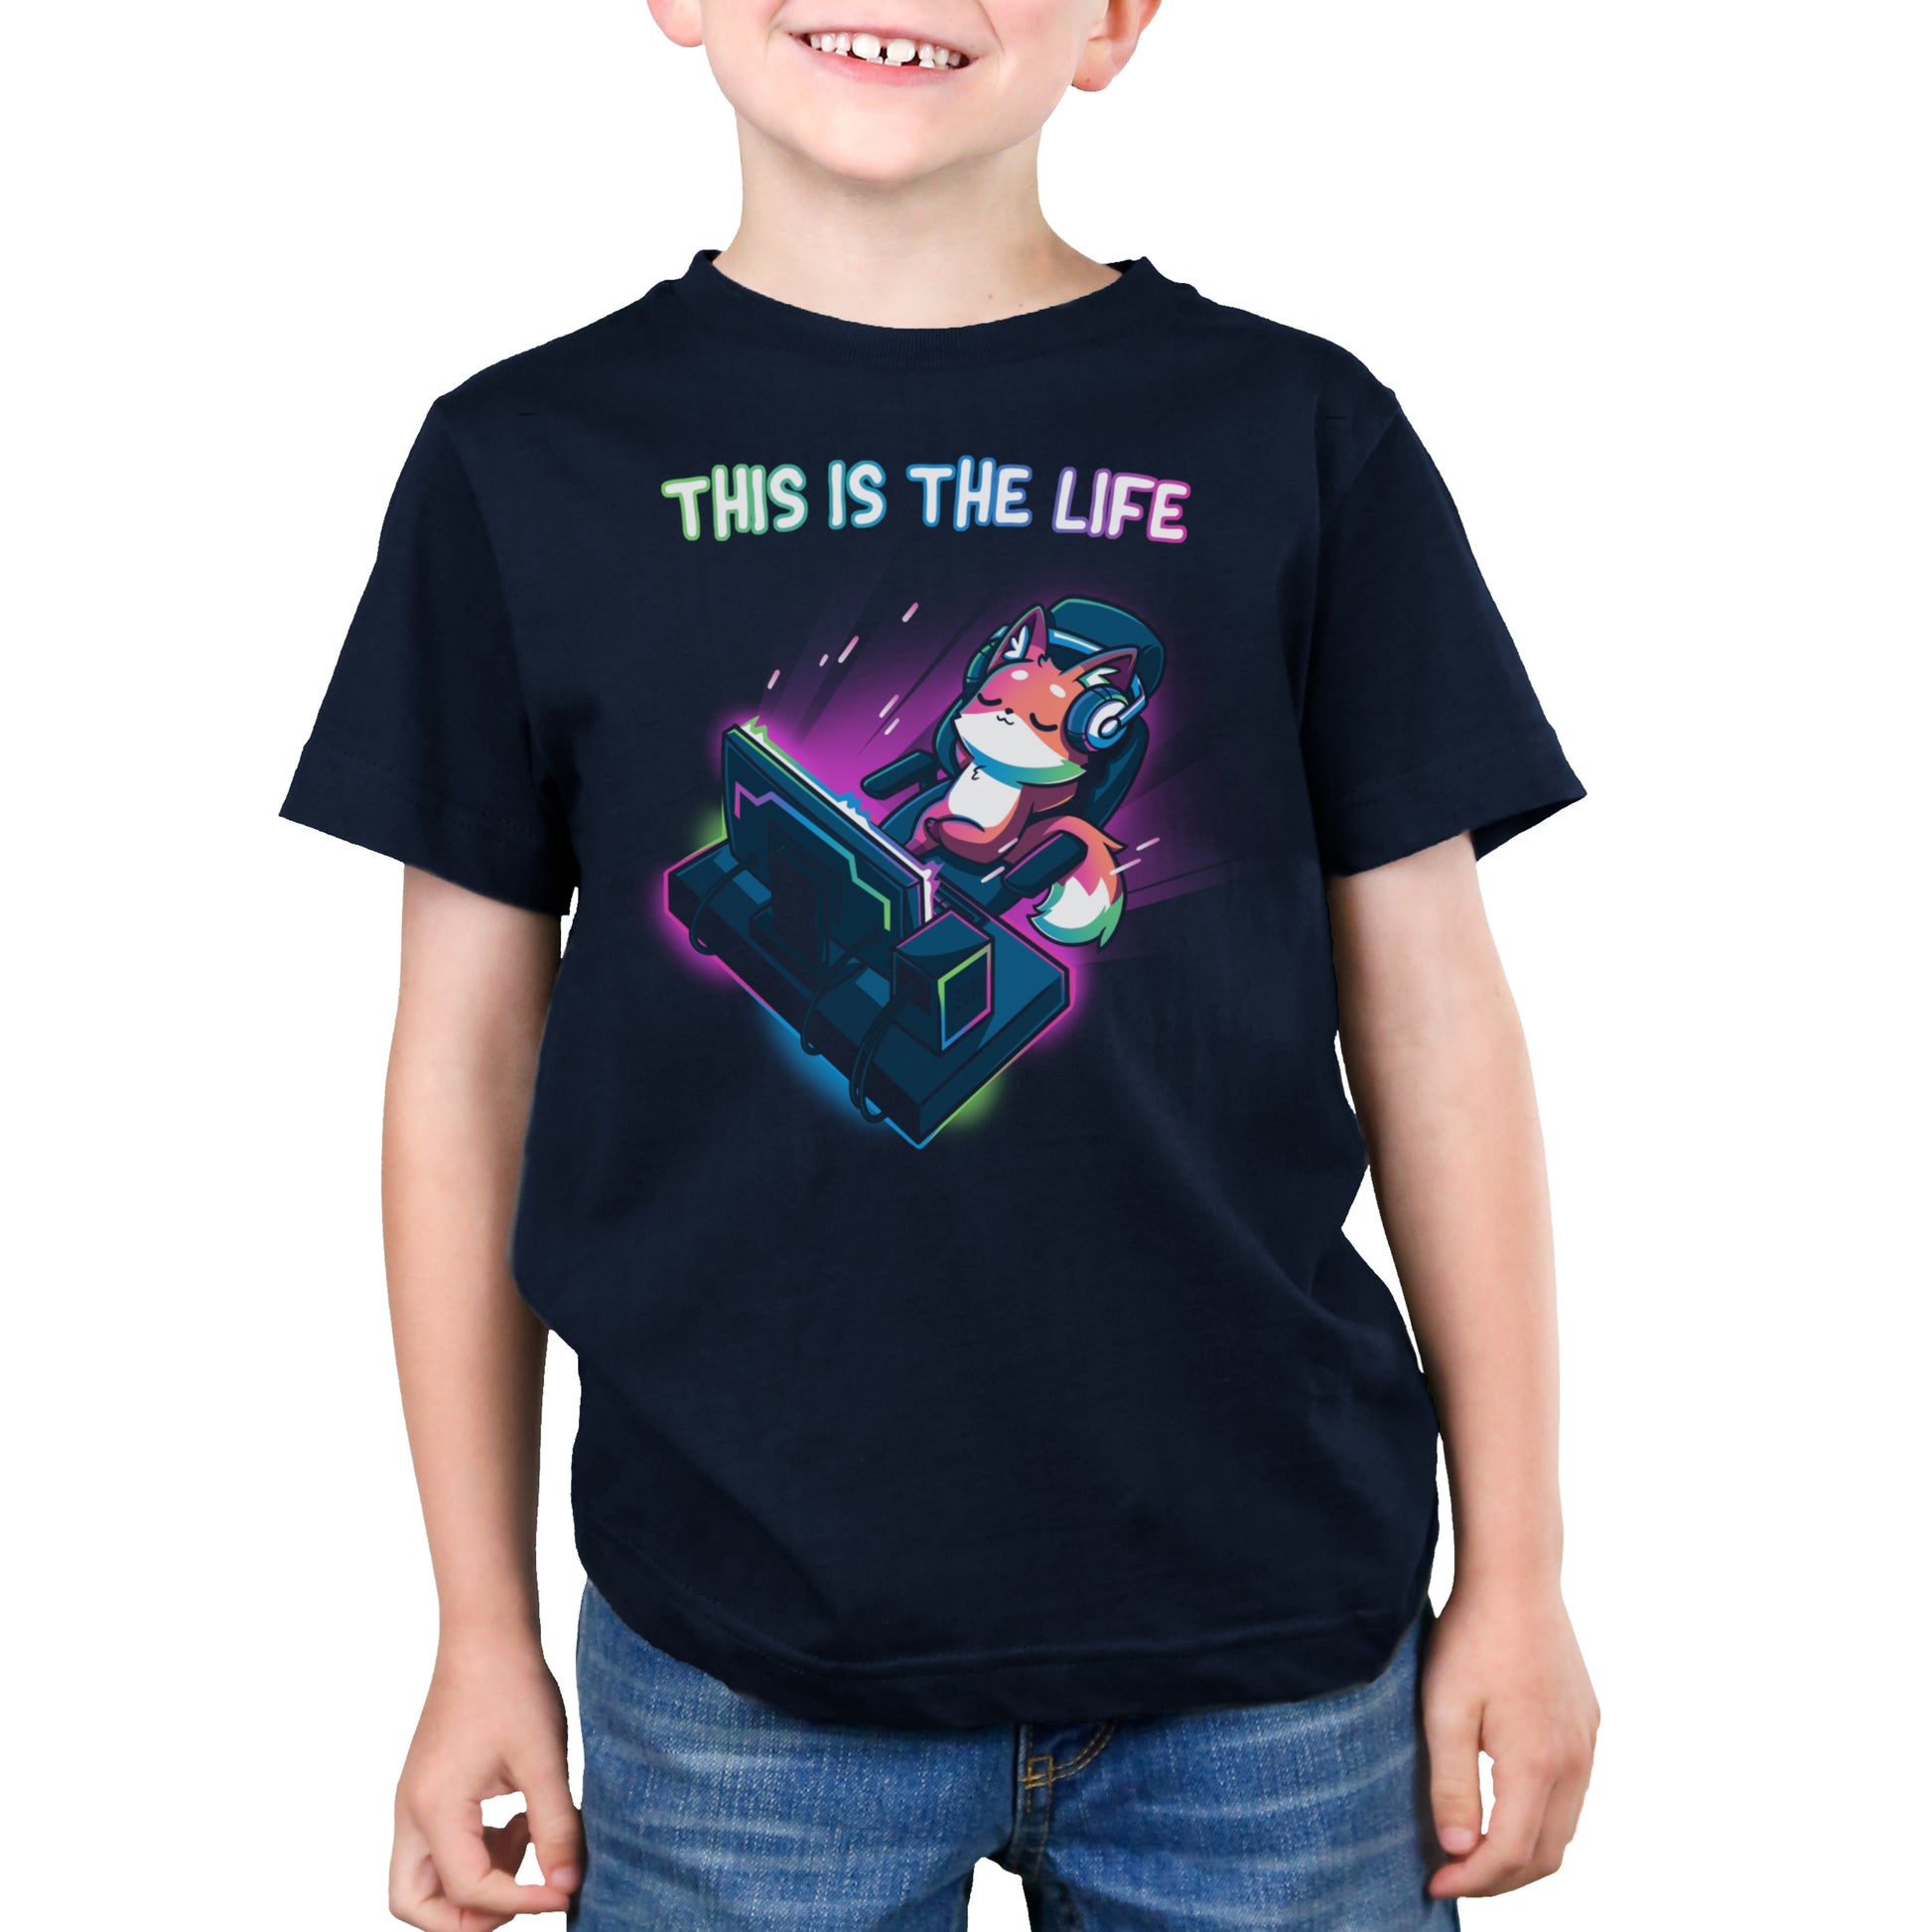 A child wearing a monsterdigital navy blue gaming t-shirt called "This Is the Life" with a graphic of a fox on a computer monitor and the text "This is the Life".